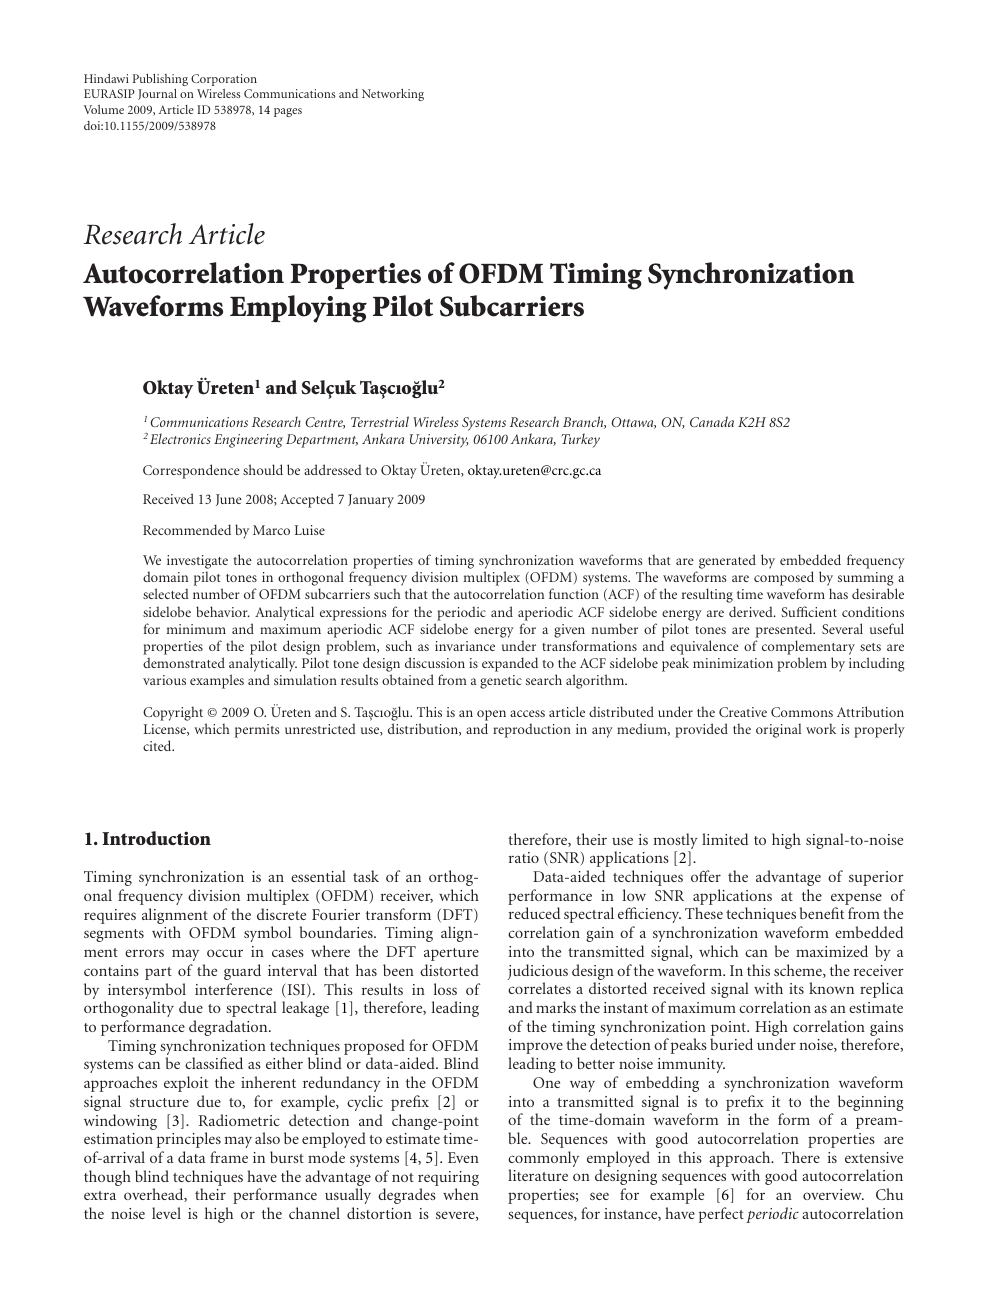 Autocorrelation Properties Of Ofdm Timing Synchronization Waveforms Employing Pilot Subcarriers Topic Of Research Paper In Electrical Engineering Electronic Engineering Information Engineering Download Scholarly Article Pdf And Read For Free On